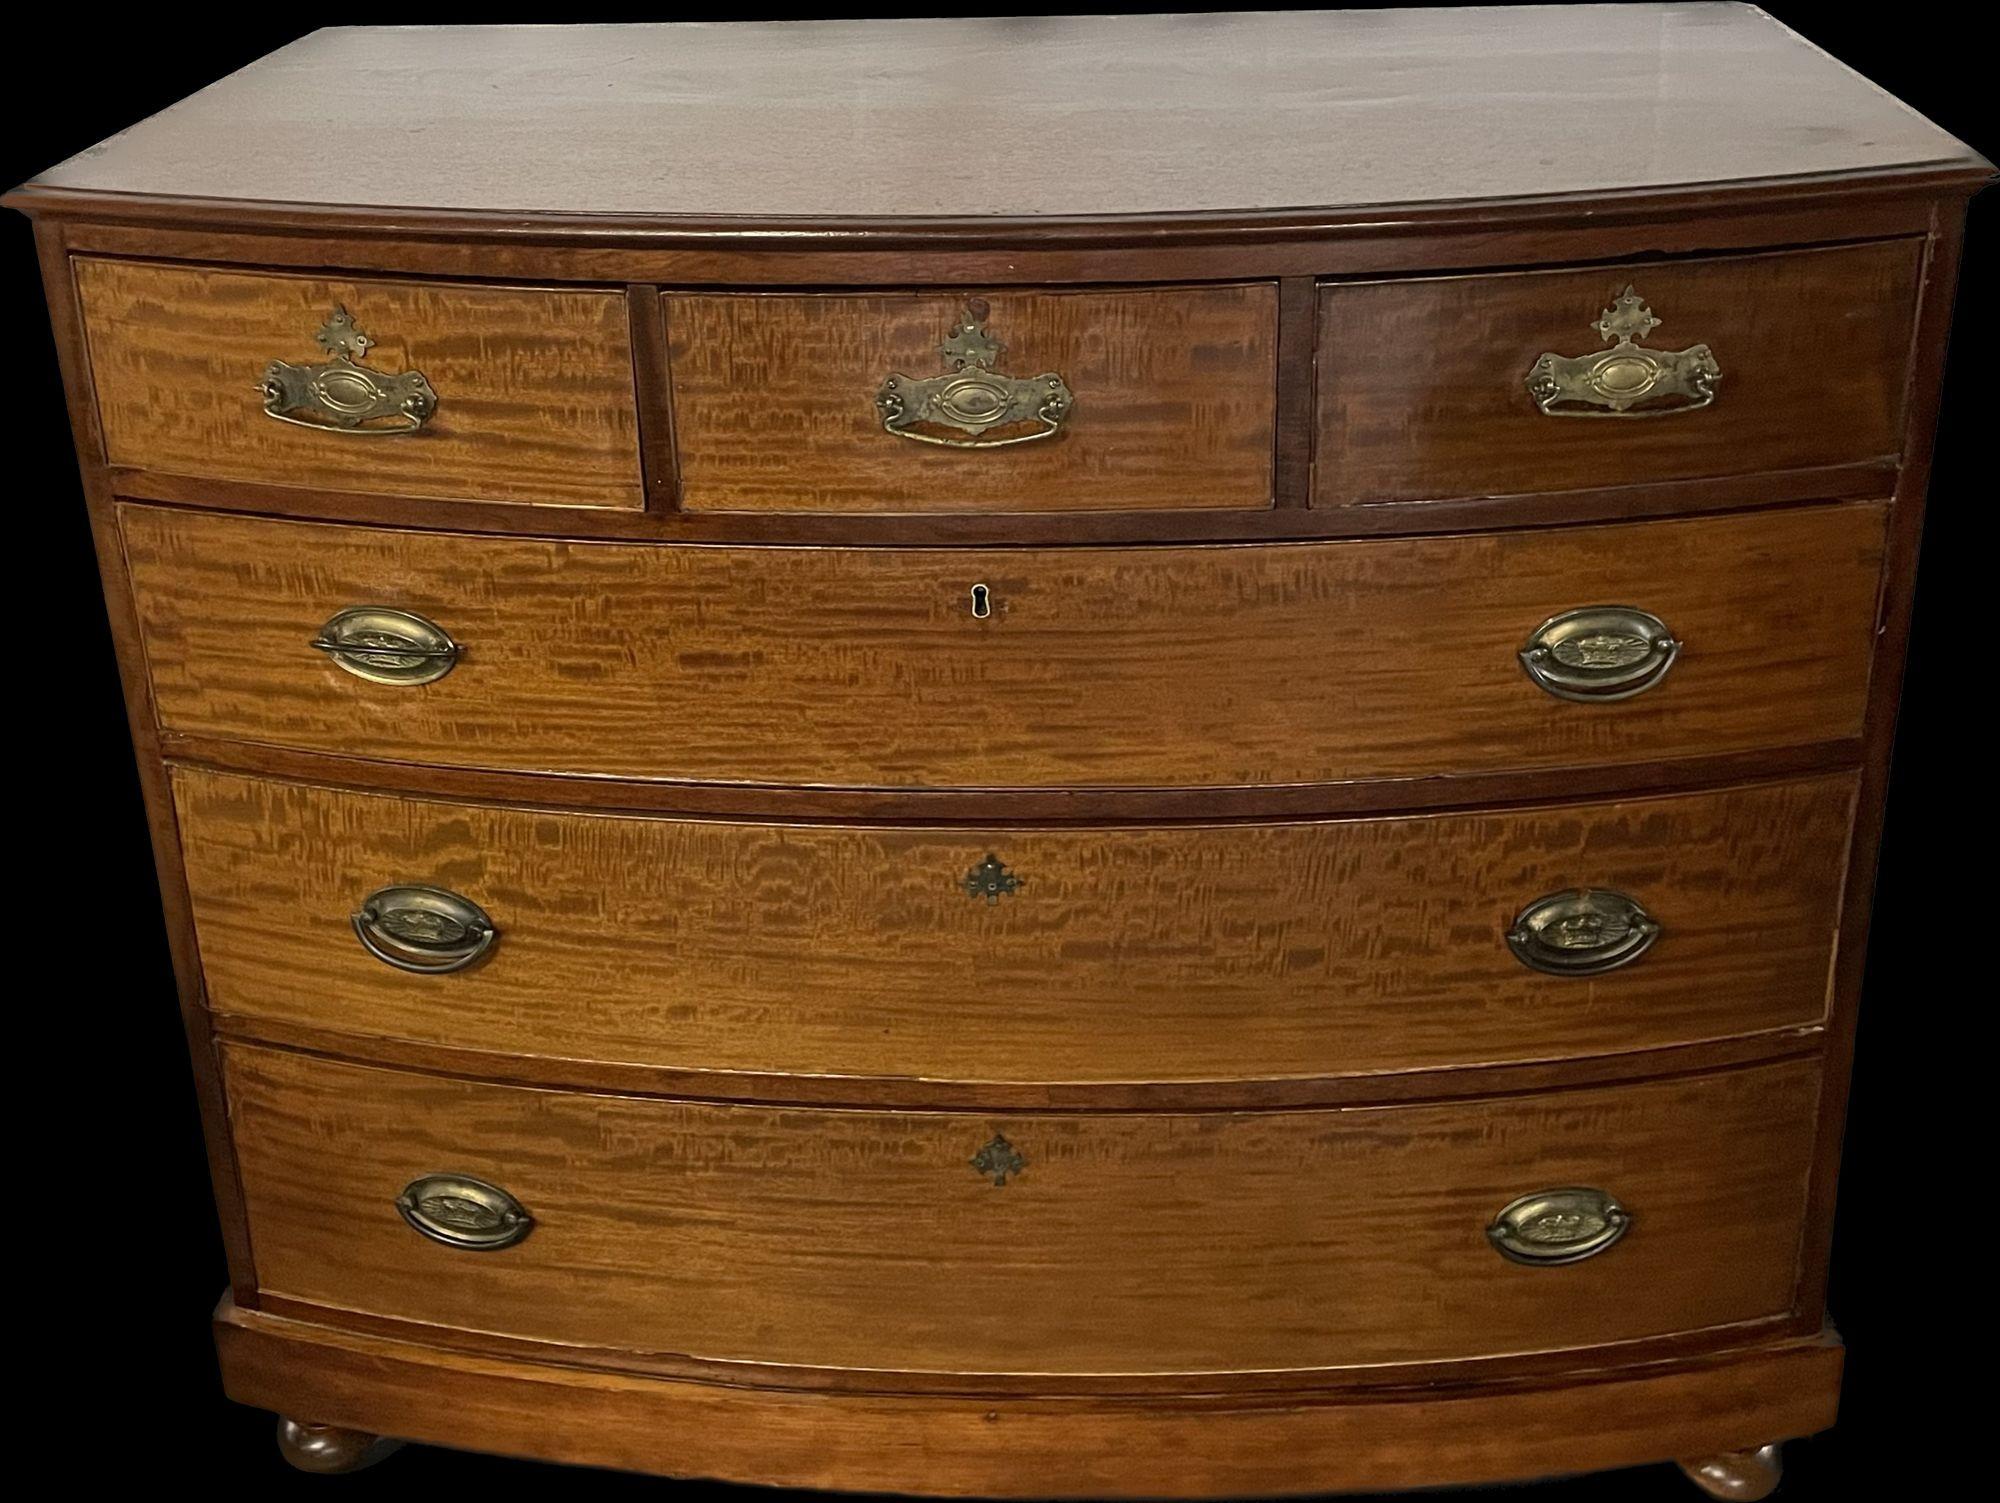 English 19th Century Georgian Bow Front Chest, Mahogany, Rare 3 over 3 Drawer